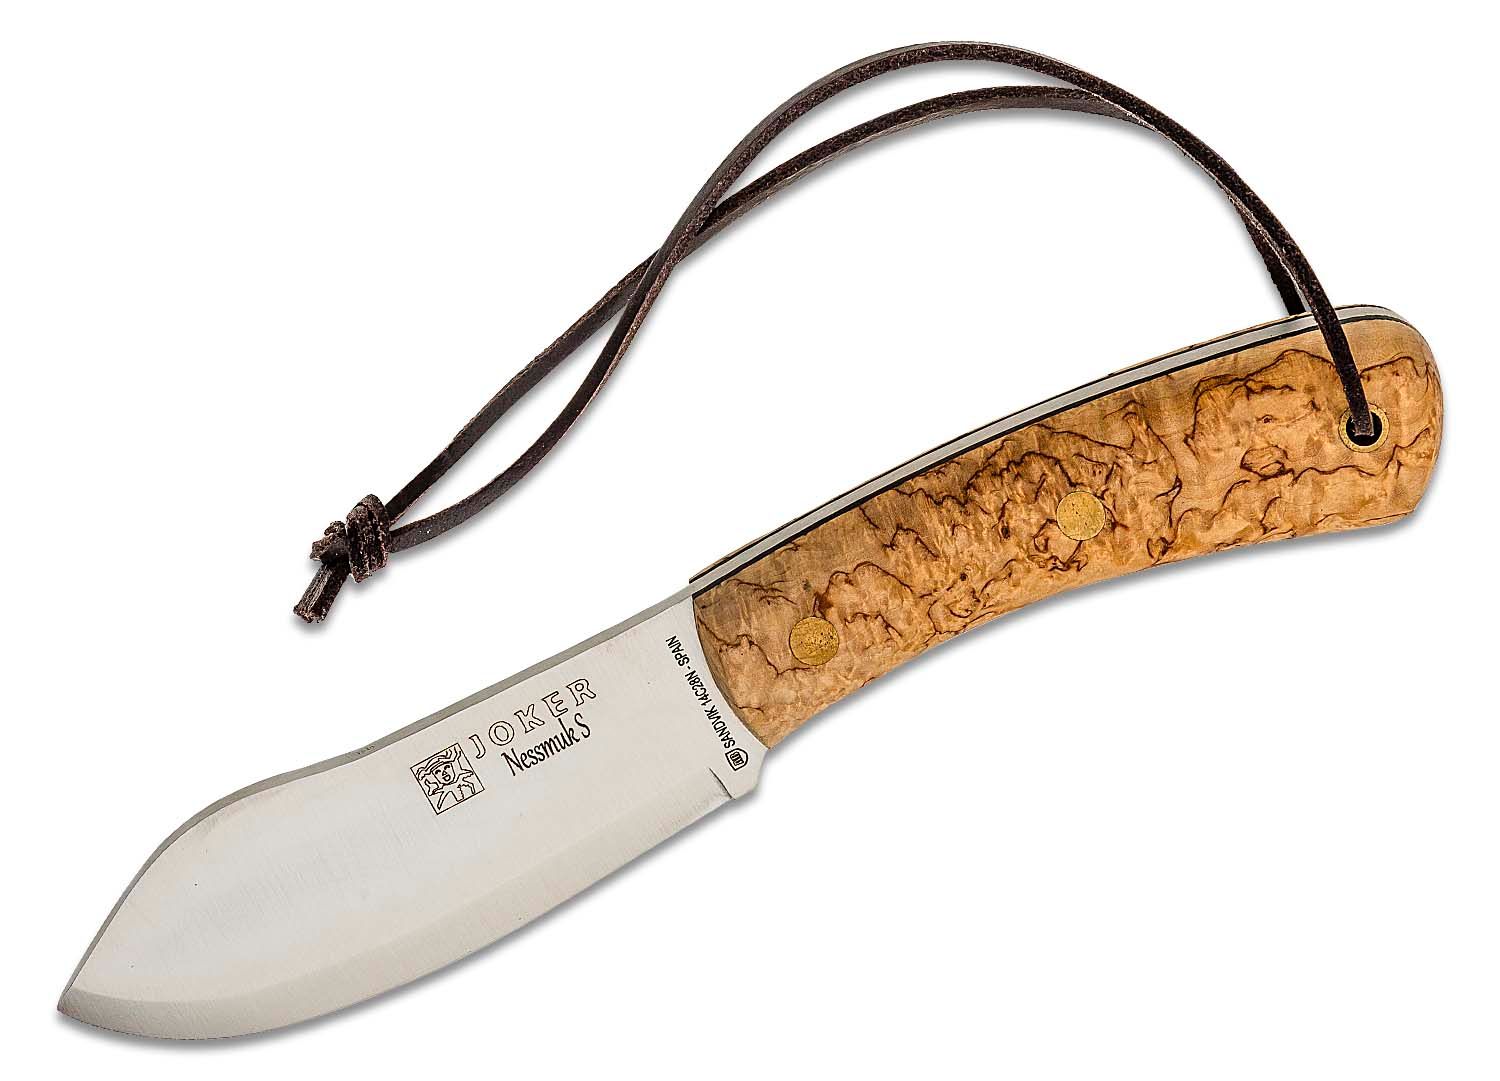  Joker Nessmuk CL136-P Hunting Knife, 11cm/4.3in Sandvik  14C28N Blade with Flat Grinding, Birch Handle, Brown Leather Sheath and  Flint, Fishing, Hunting, Camping and Hiking Tool : Sports & Outdoors